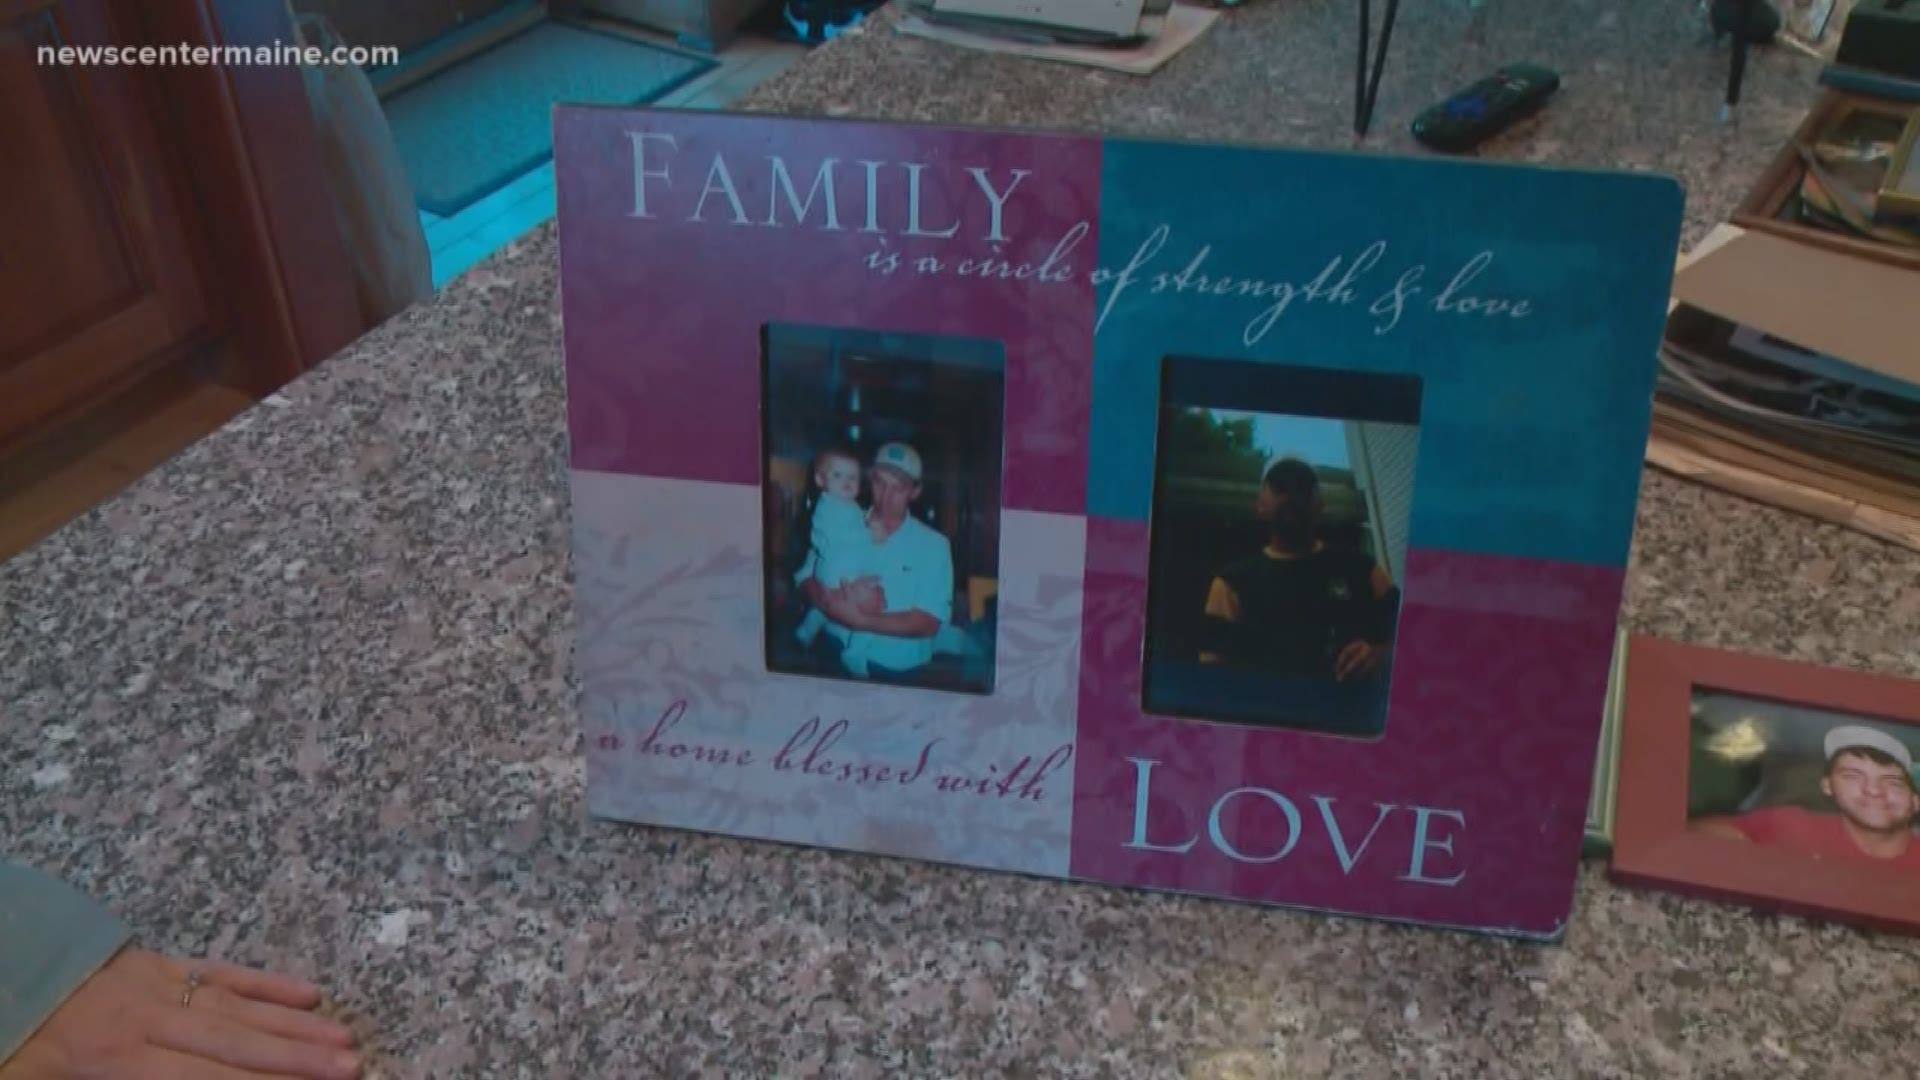 A Bangor family search for answers after their loved one went missing late last year.